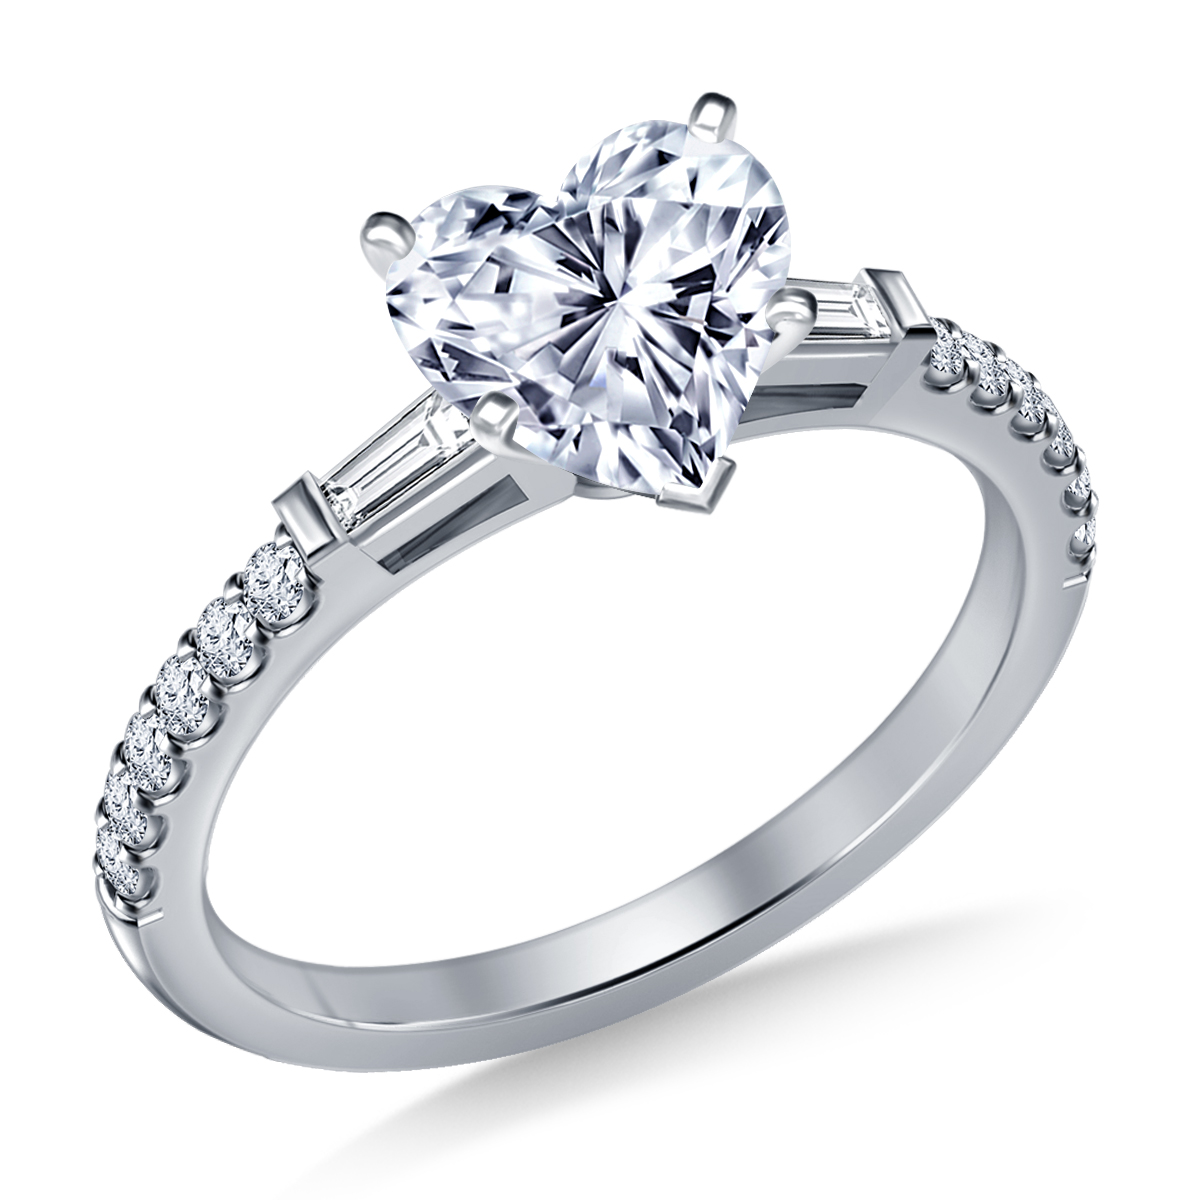 Tapered Baguette Engagement Ring with Accent Diamonds in 14K White Gold (1/3 cttw.)